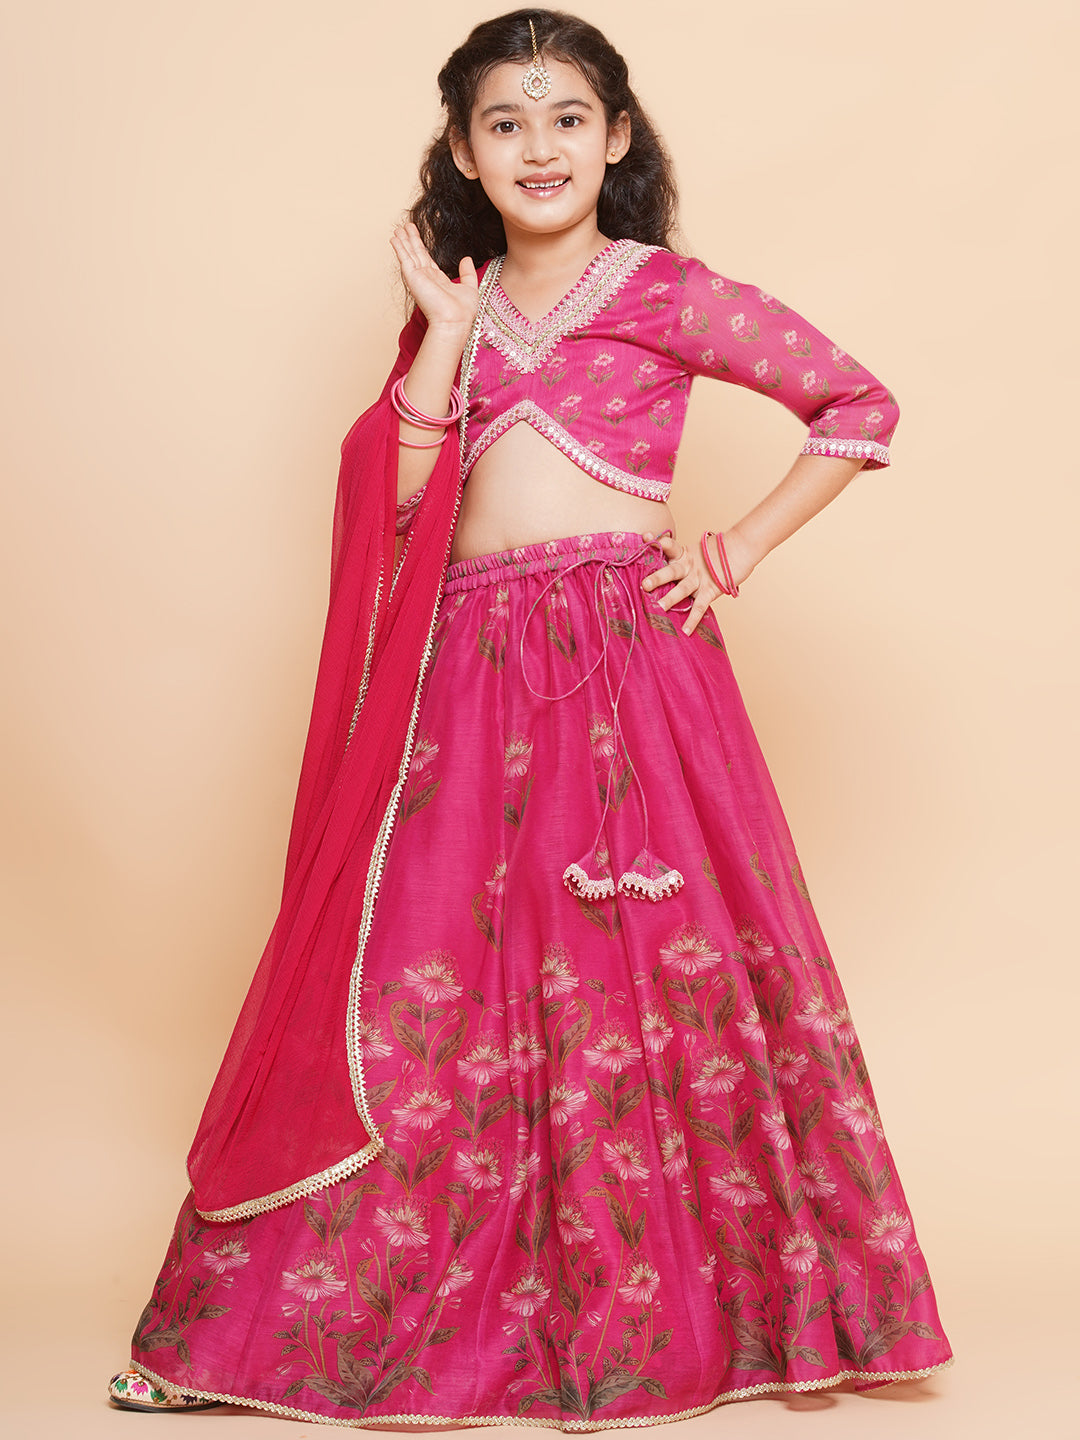 Girls Dark Pink Floral Printed Ready to Wear Lehenga & Blouse With Dupatta